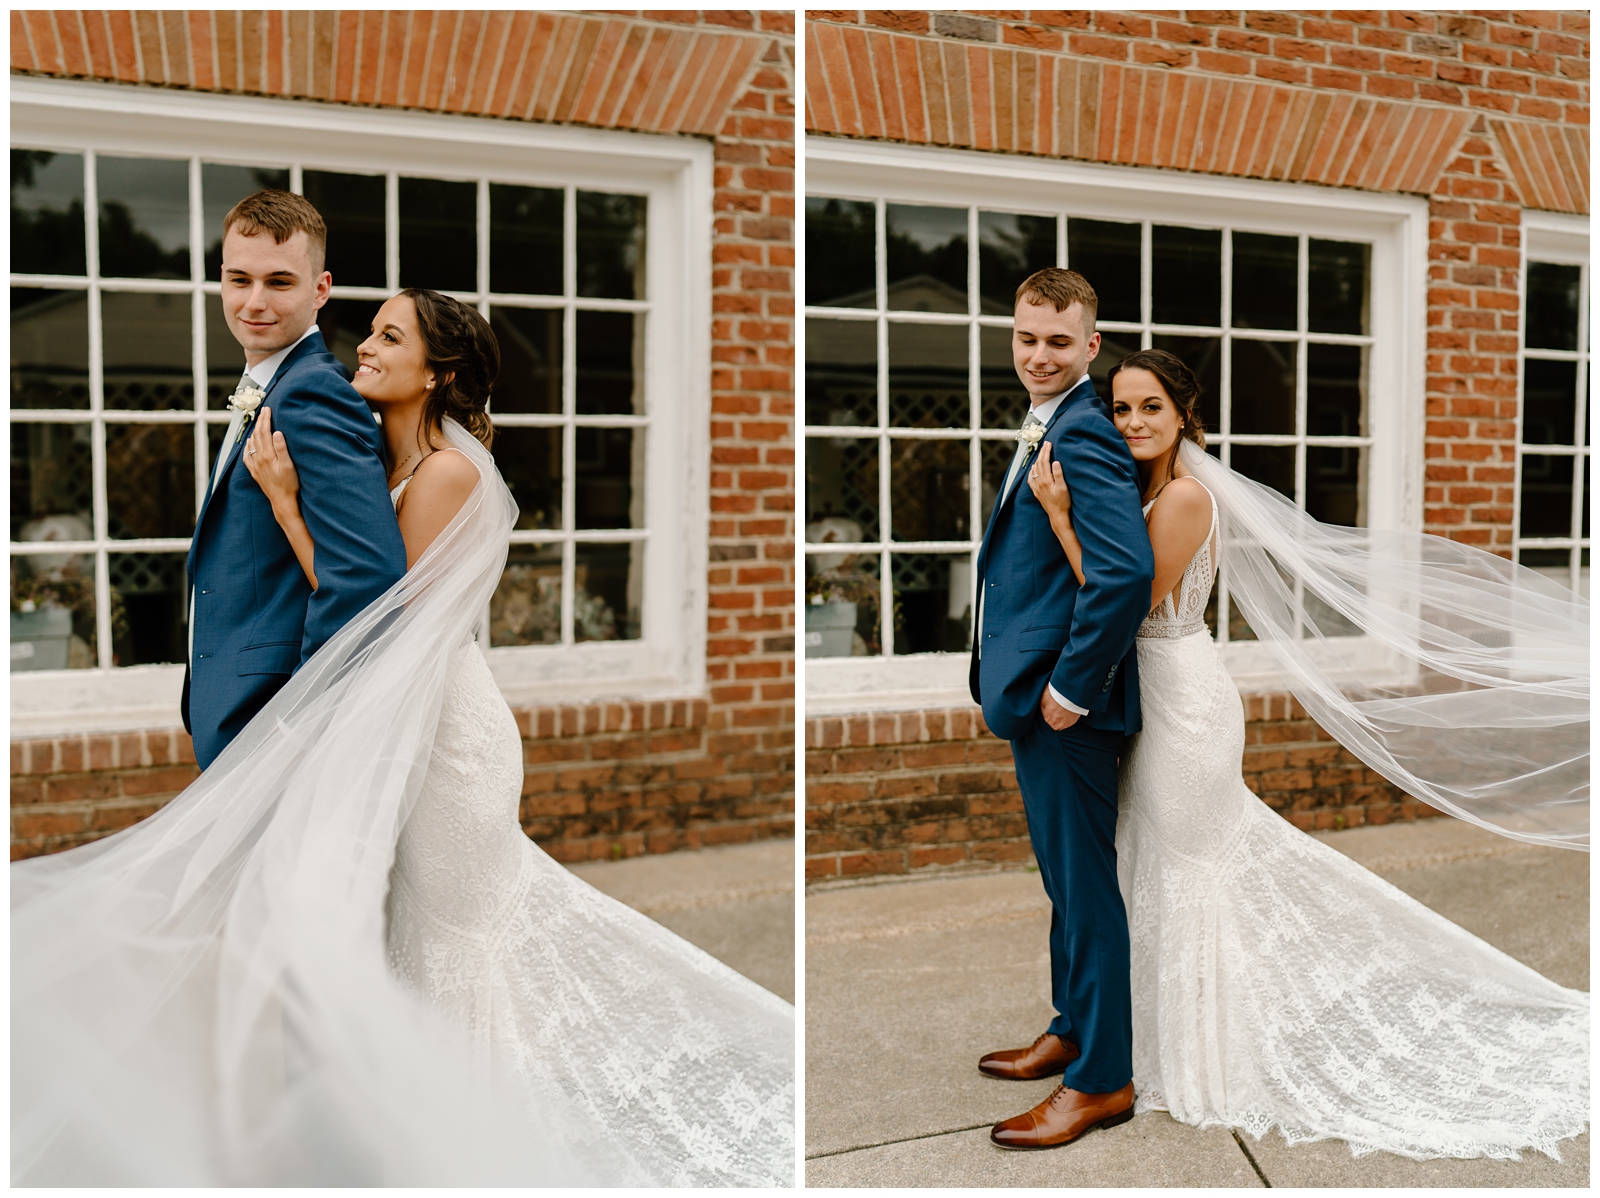 Modern Indie bride and groom portraits with veil in front of old brick shop in North Carolina